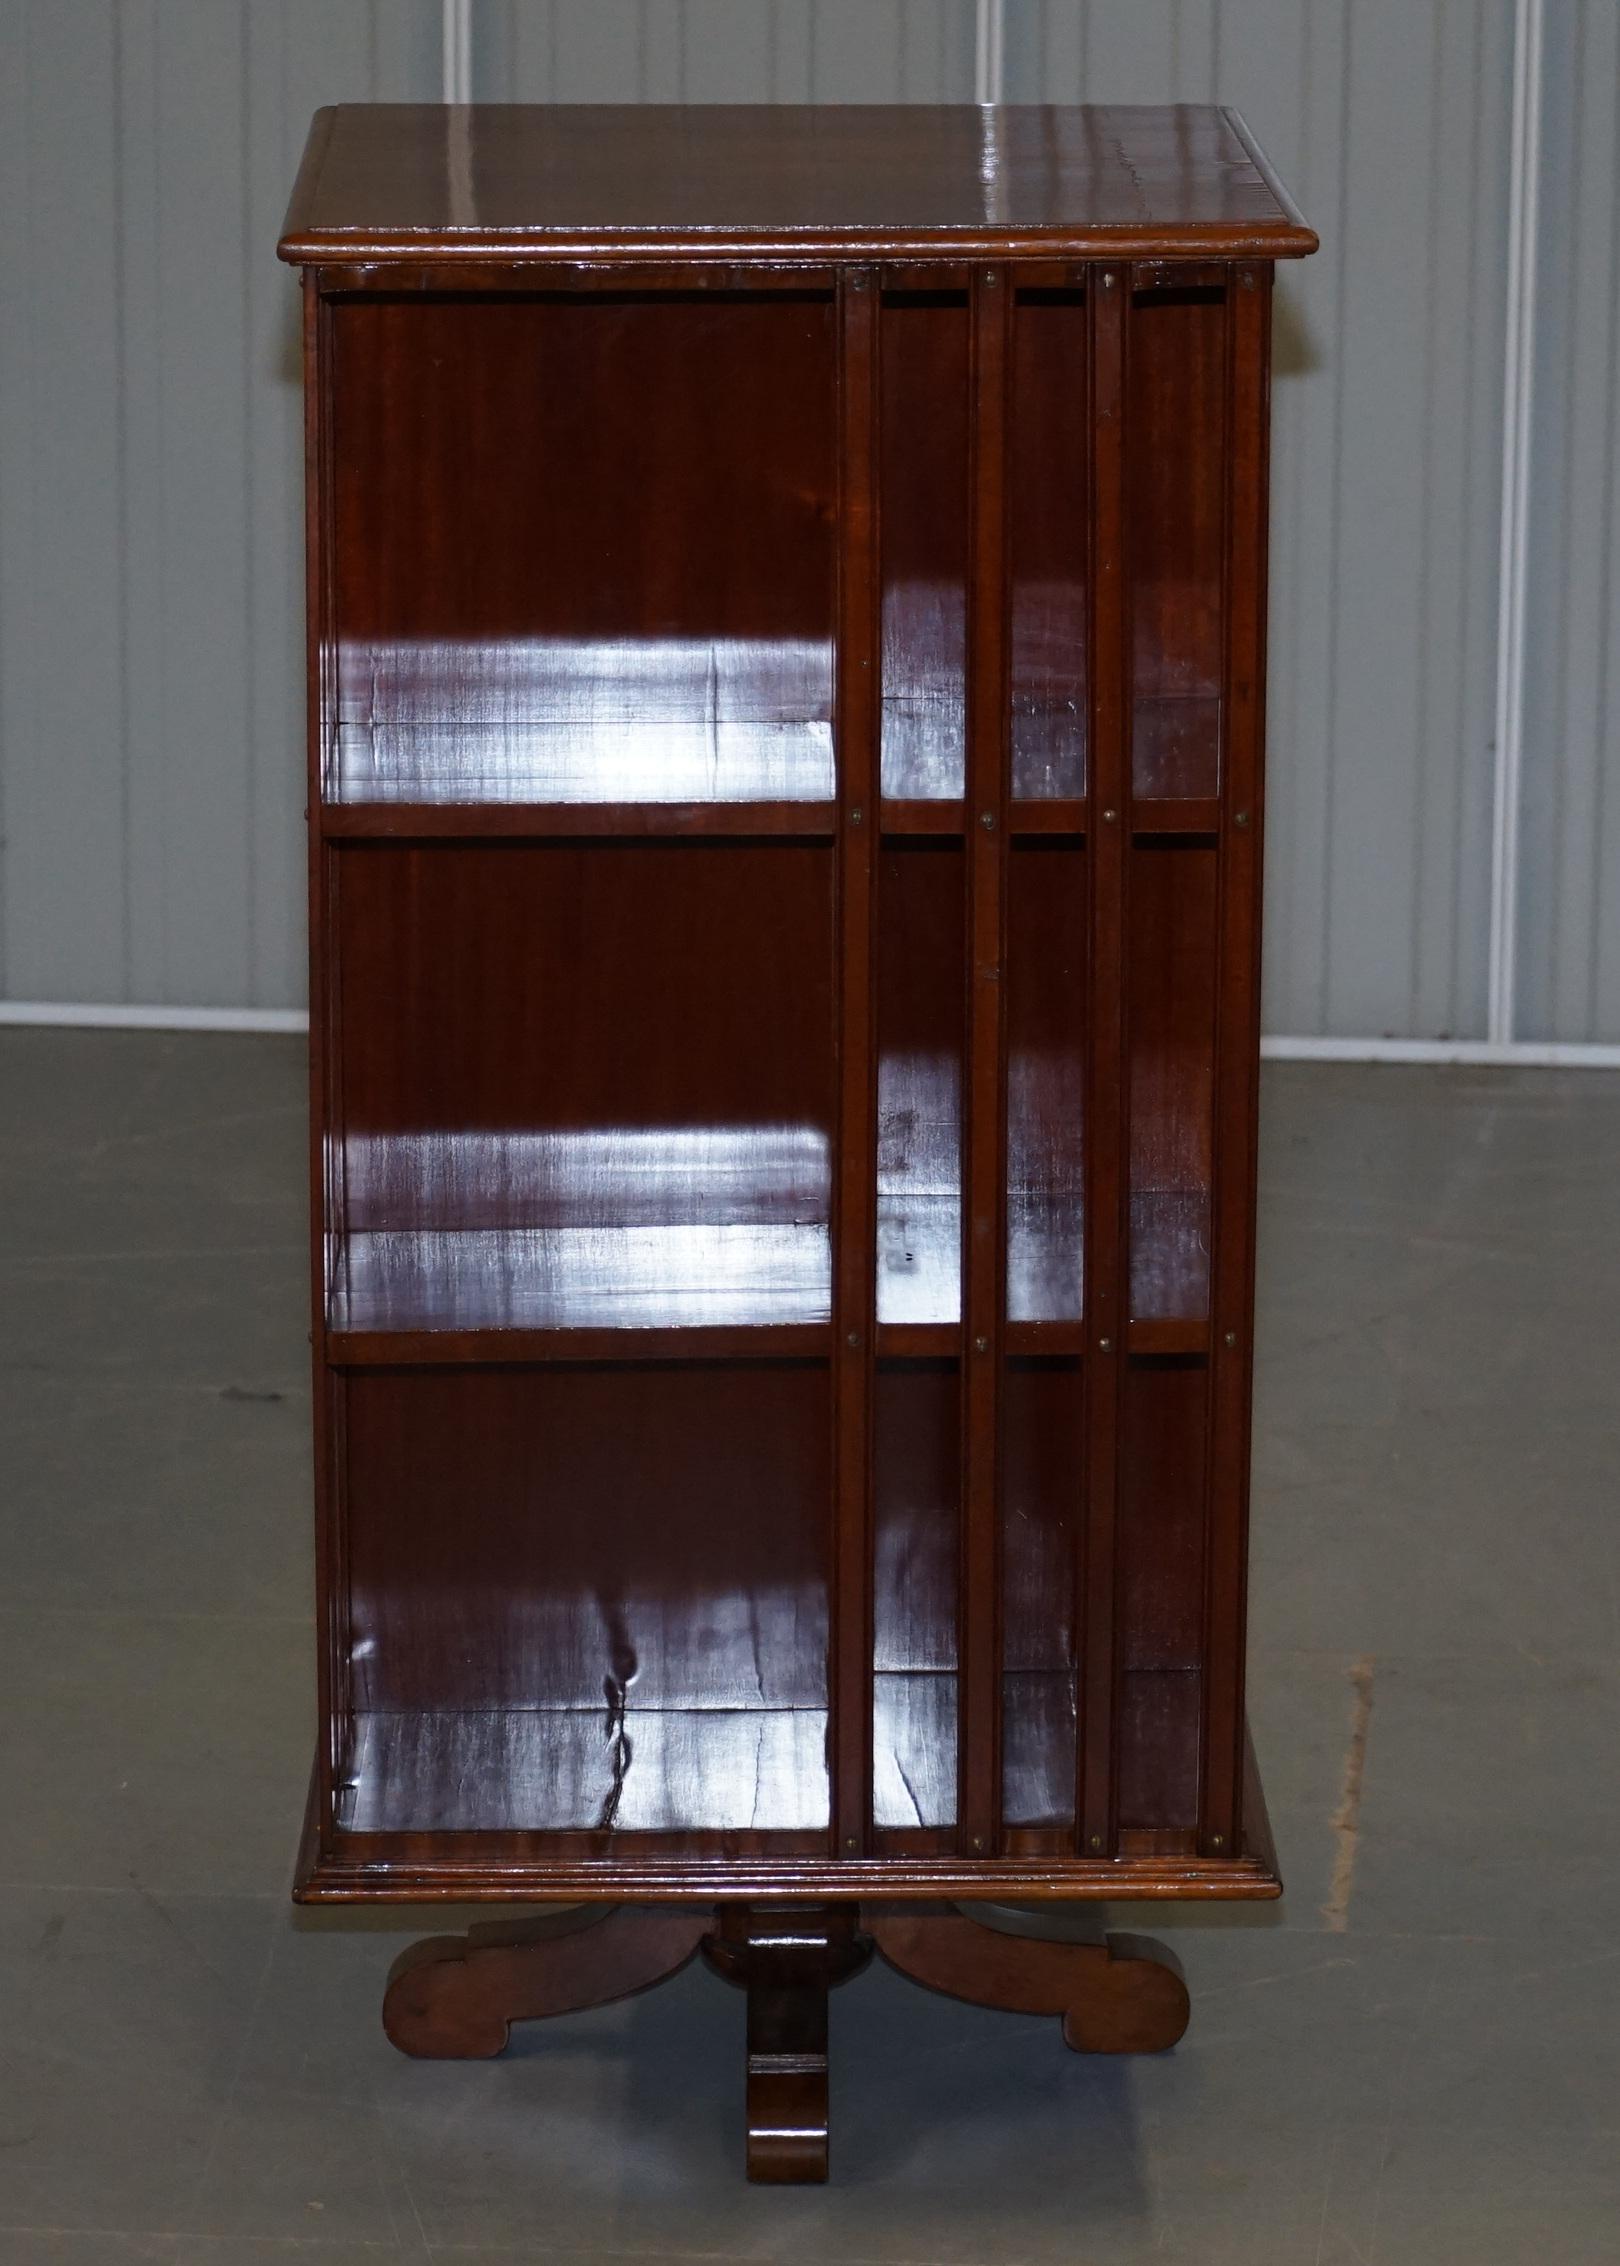 We are delighted to offer for sale this stunning circa 1900 Walnut revolving bookcase 

An exceptionally well made and decorative library bookcase. These add a sense of style and occasion to any setting, this is a much larger three tiered piece